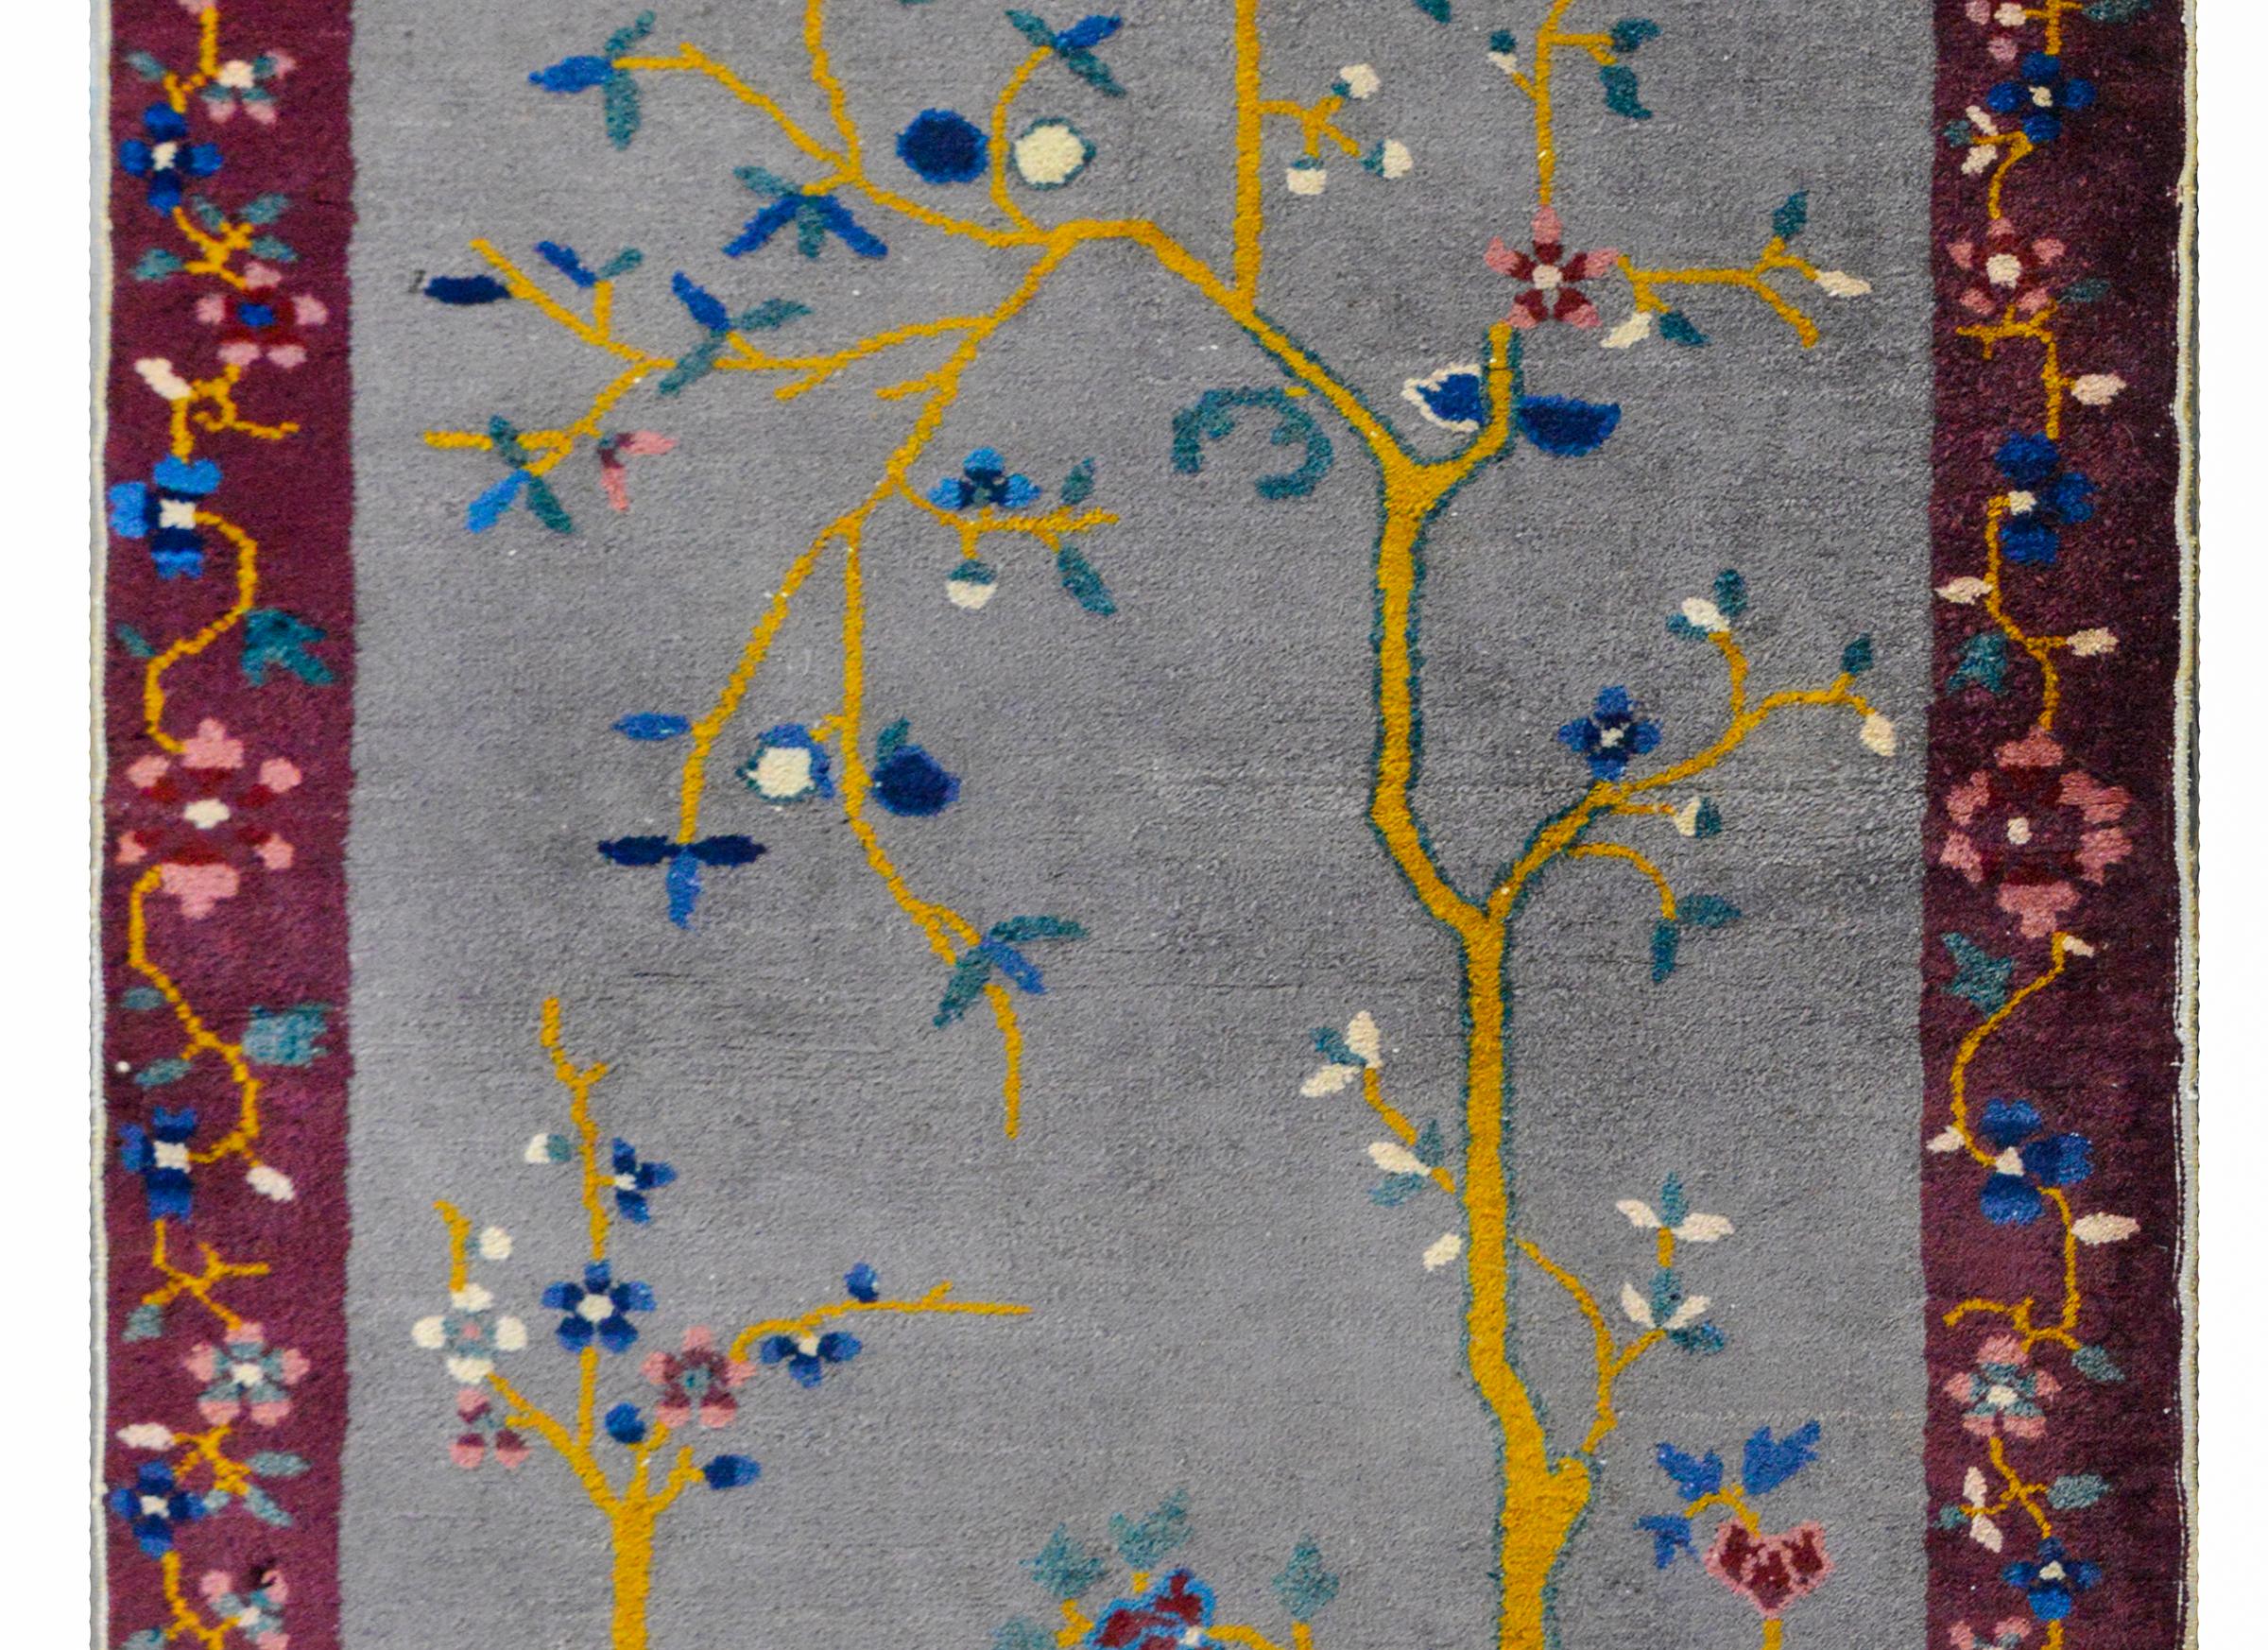 A charming Chinese Art Deco rug with a gray field surrounded by a violet border. The field depicts a flowering cherry tree perched above a scholars rock at the edge of a garden. The border contains a multi-colored floral pattern.